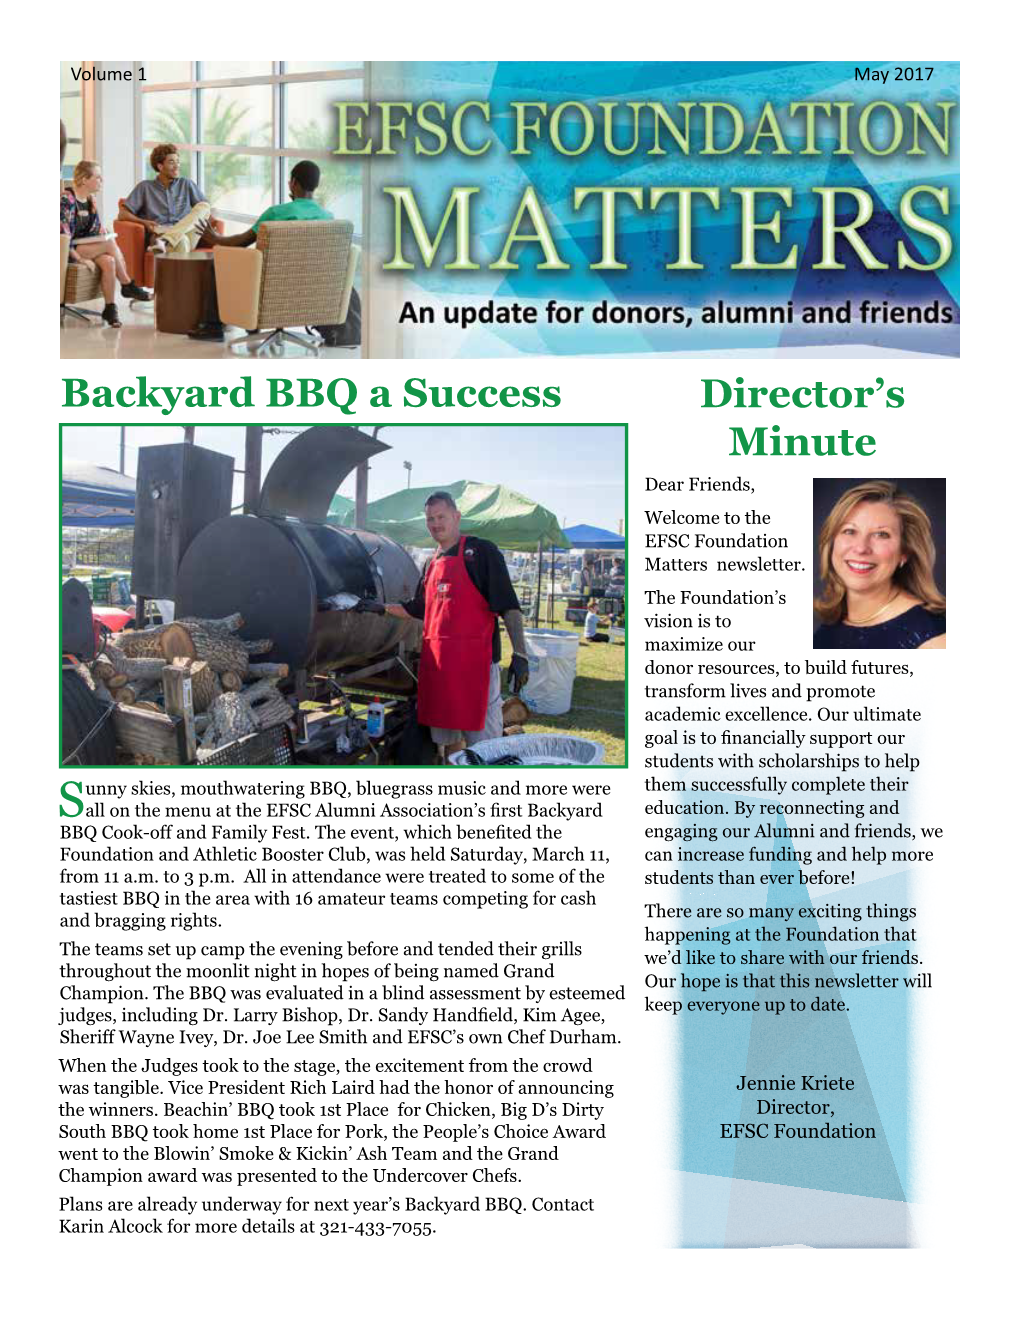 Backyard BBQ a Success Director’S Minute Dear Friends, Welcome to the EFSC Foundation Matters Newsletter